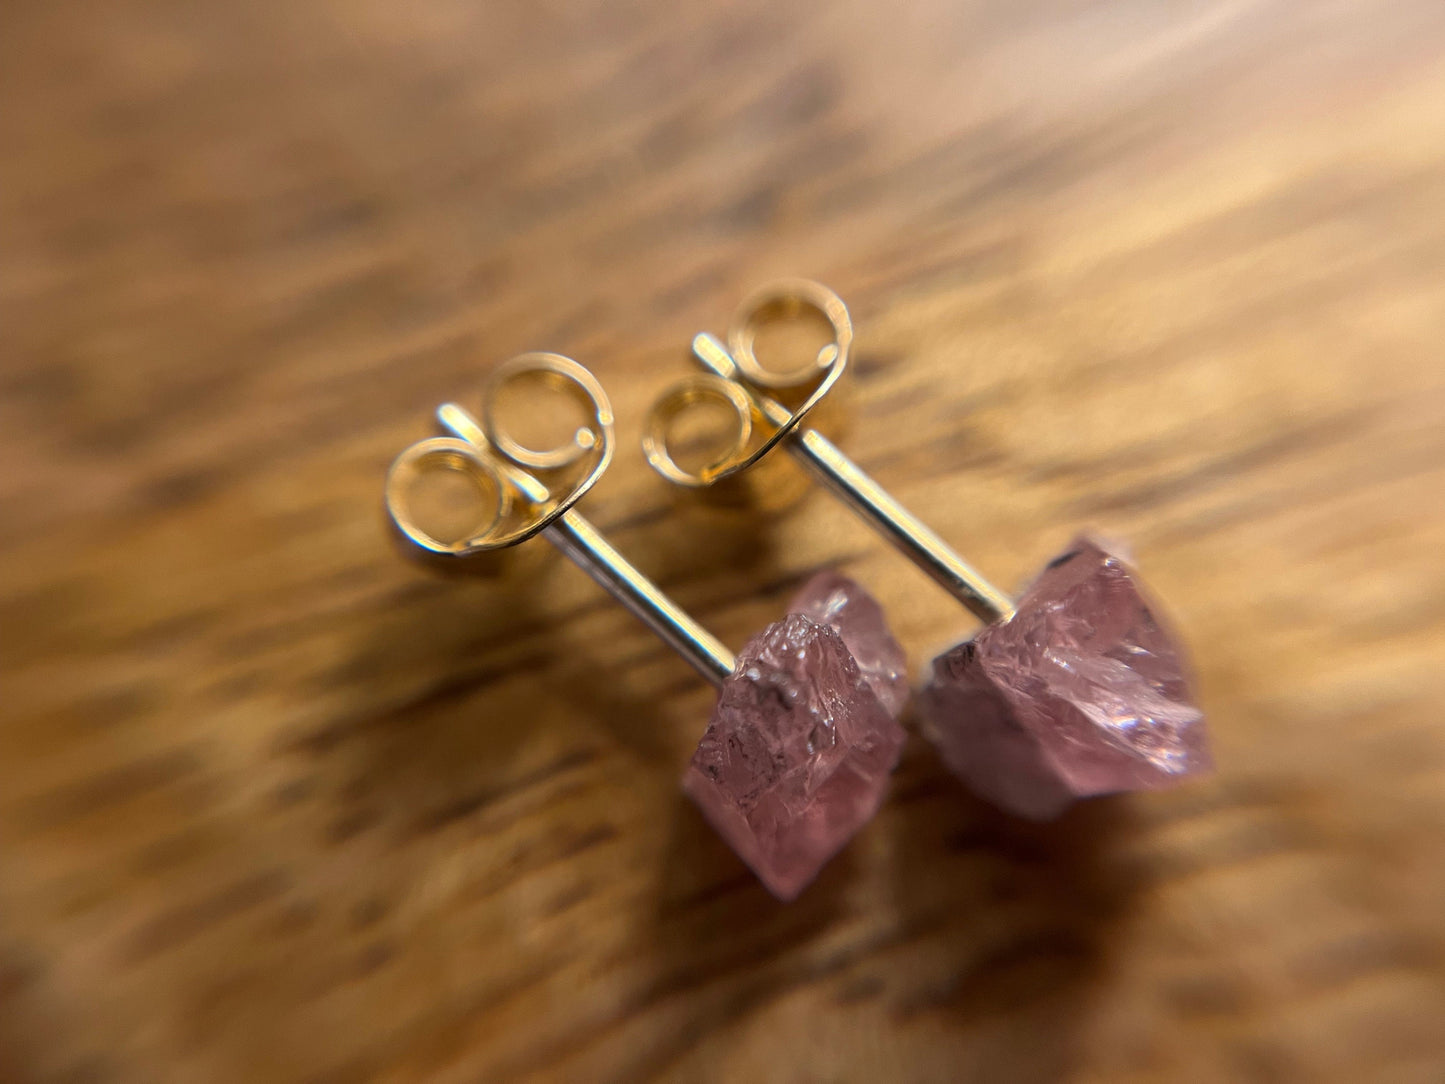 9ct or 18ct Gold Spinel Stud Earrings, Natural Spinel Earrings, Raw Crystal Earrings, Raw Spinel Jewellery, Minimalist Earring Studs